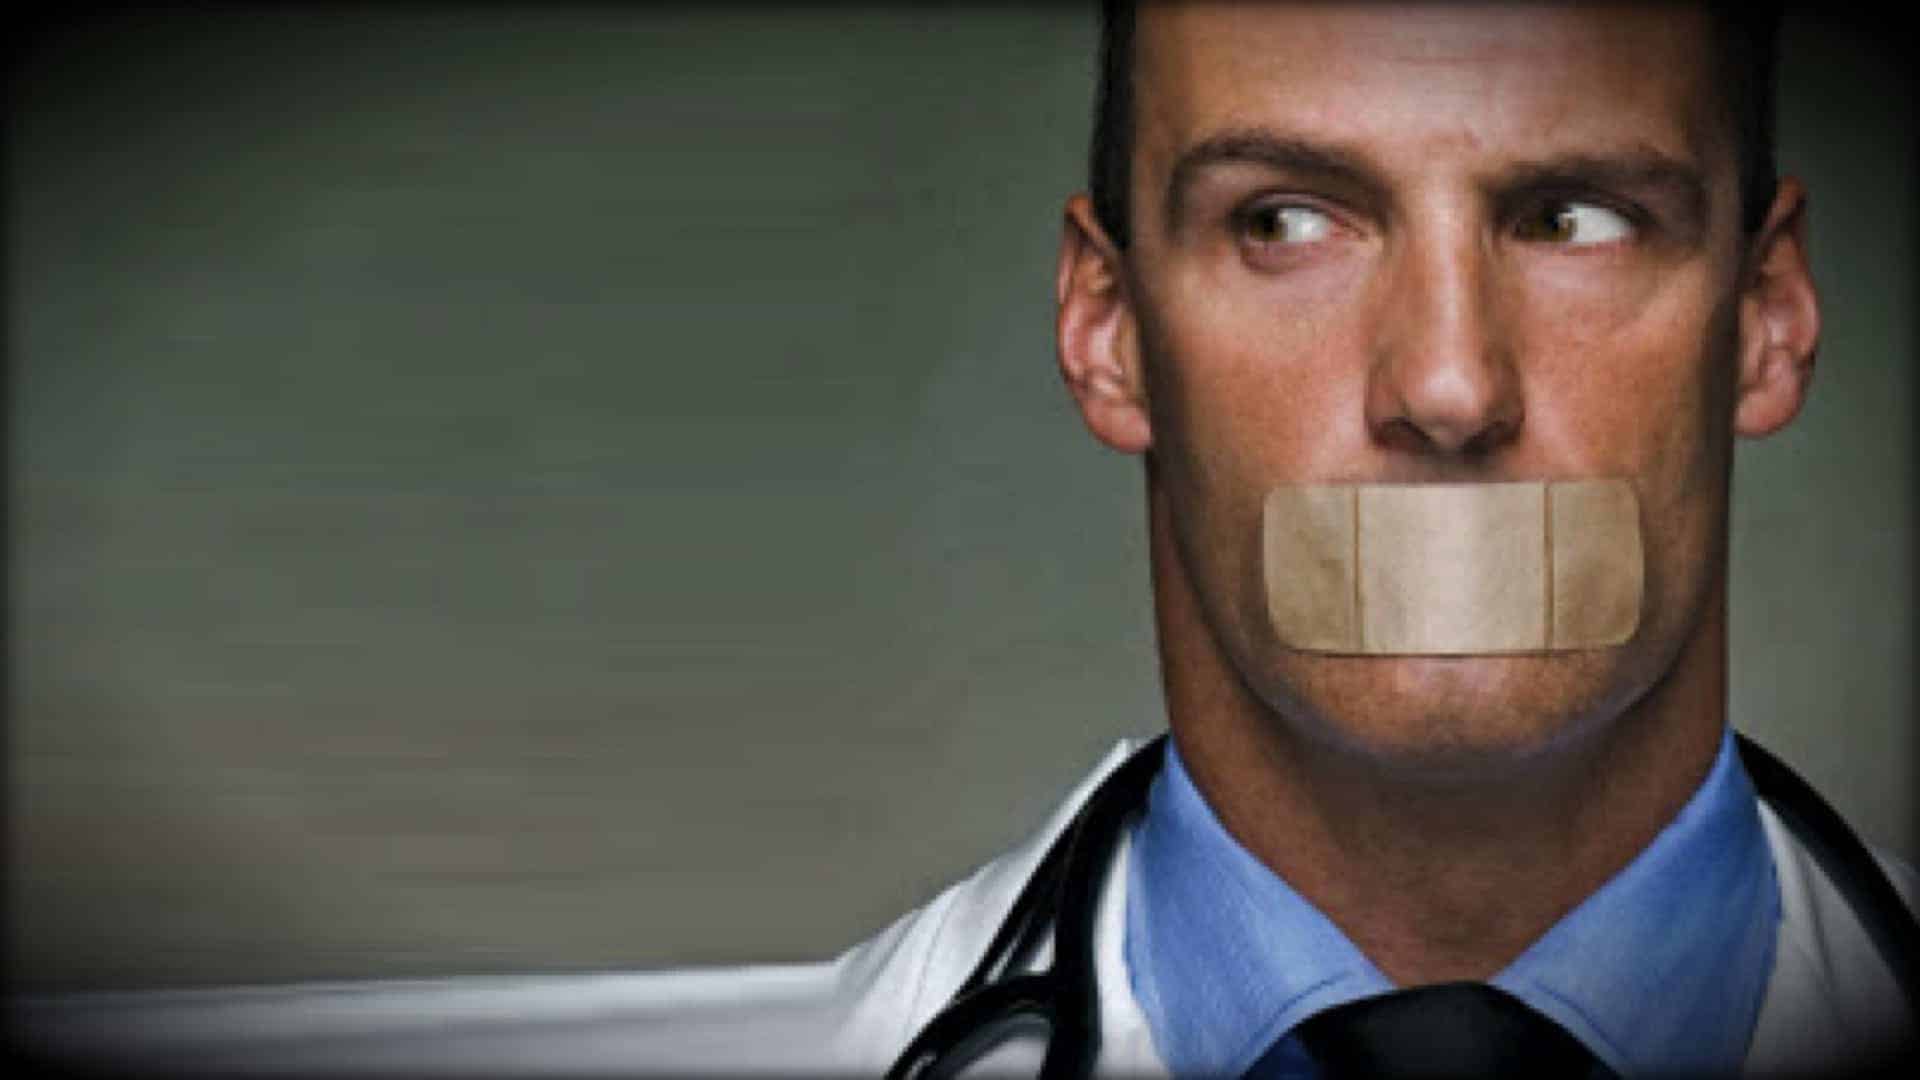 A person is shown in close up. They are wearing a white lab coat and a have a stethoscope around their necks. The are looking hard to one side whilst facing forward. A large self-adhesive plaster is fixed across their mouth, sealing it closed.